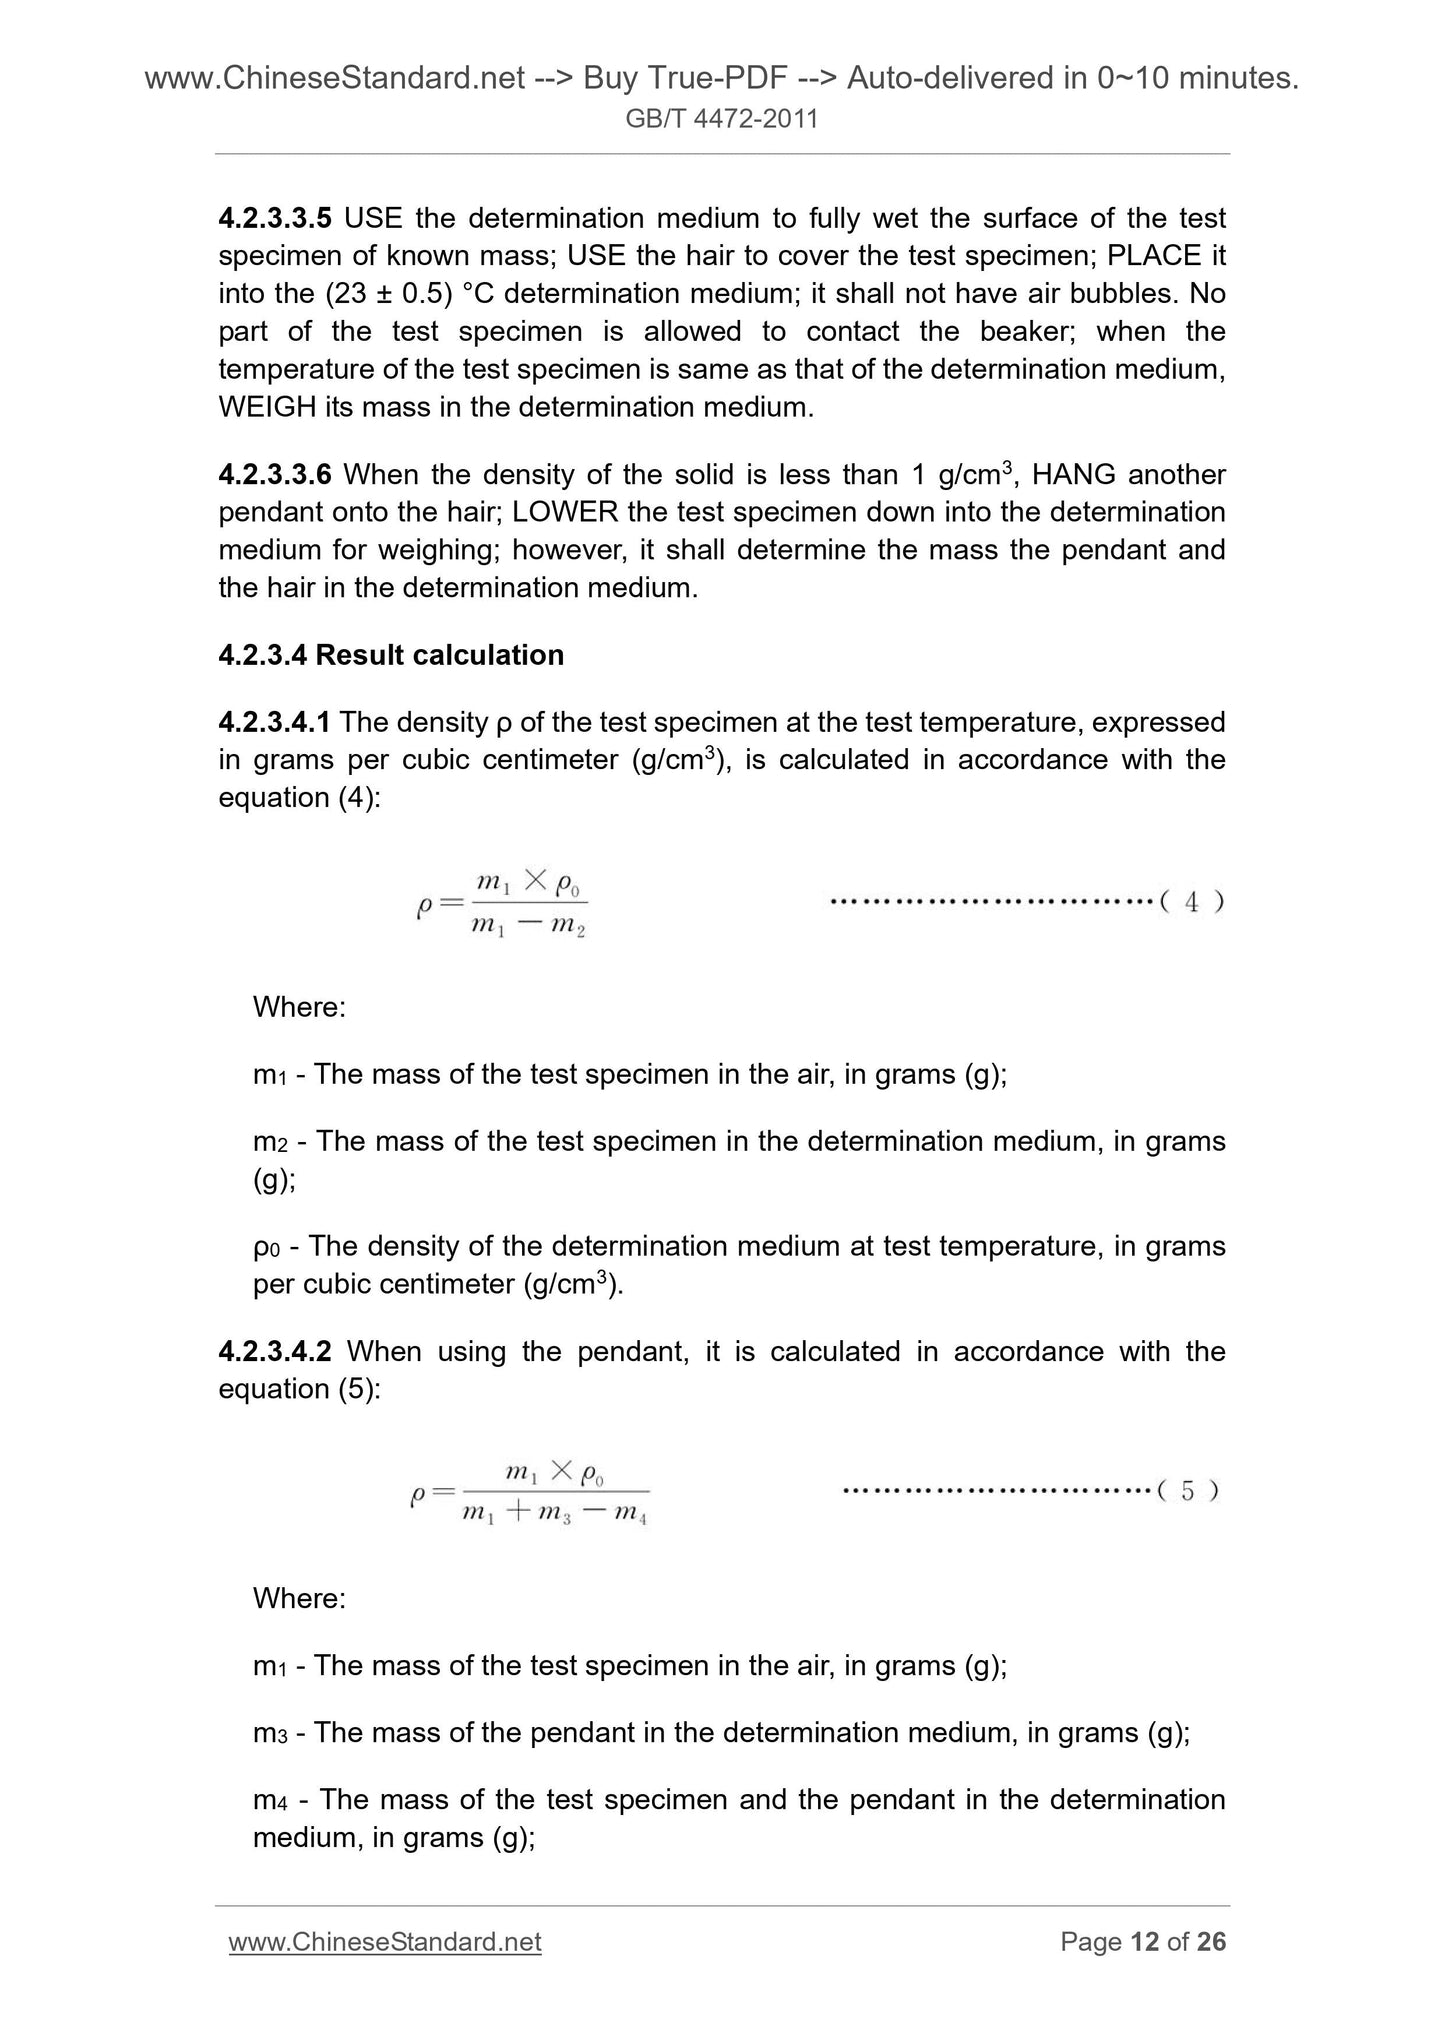 GB/T 4472-2011 Page 7